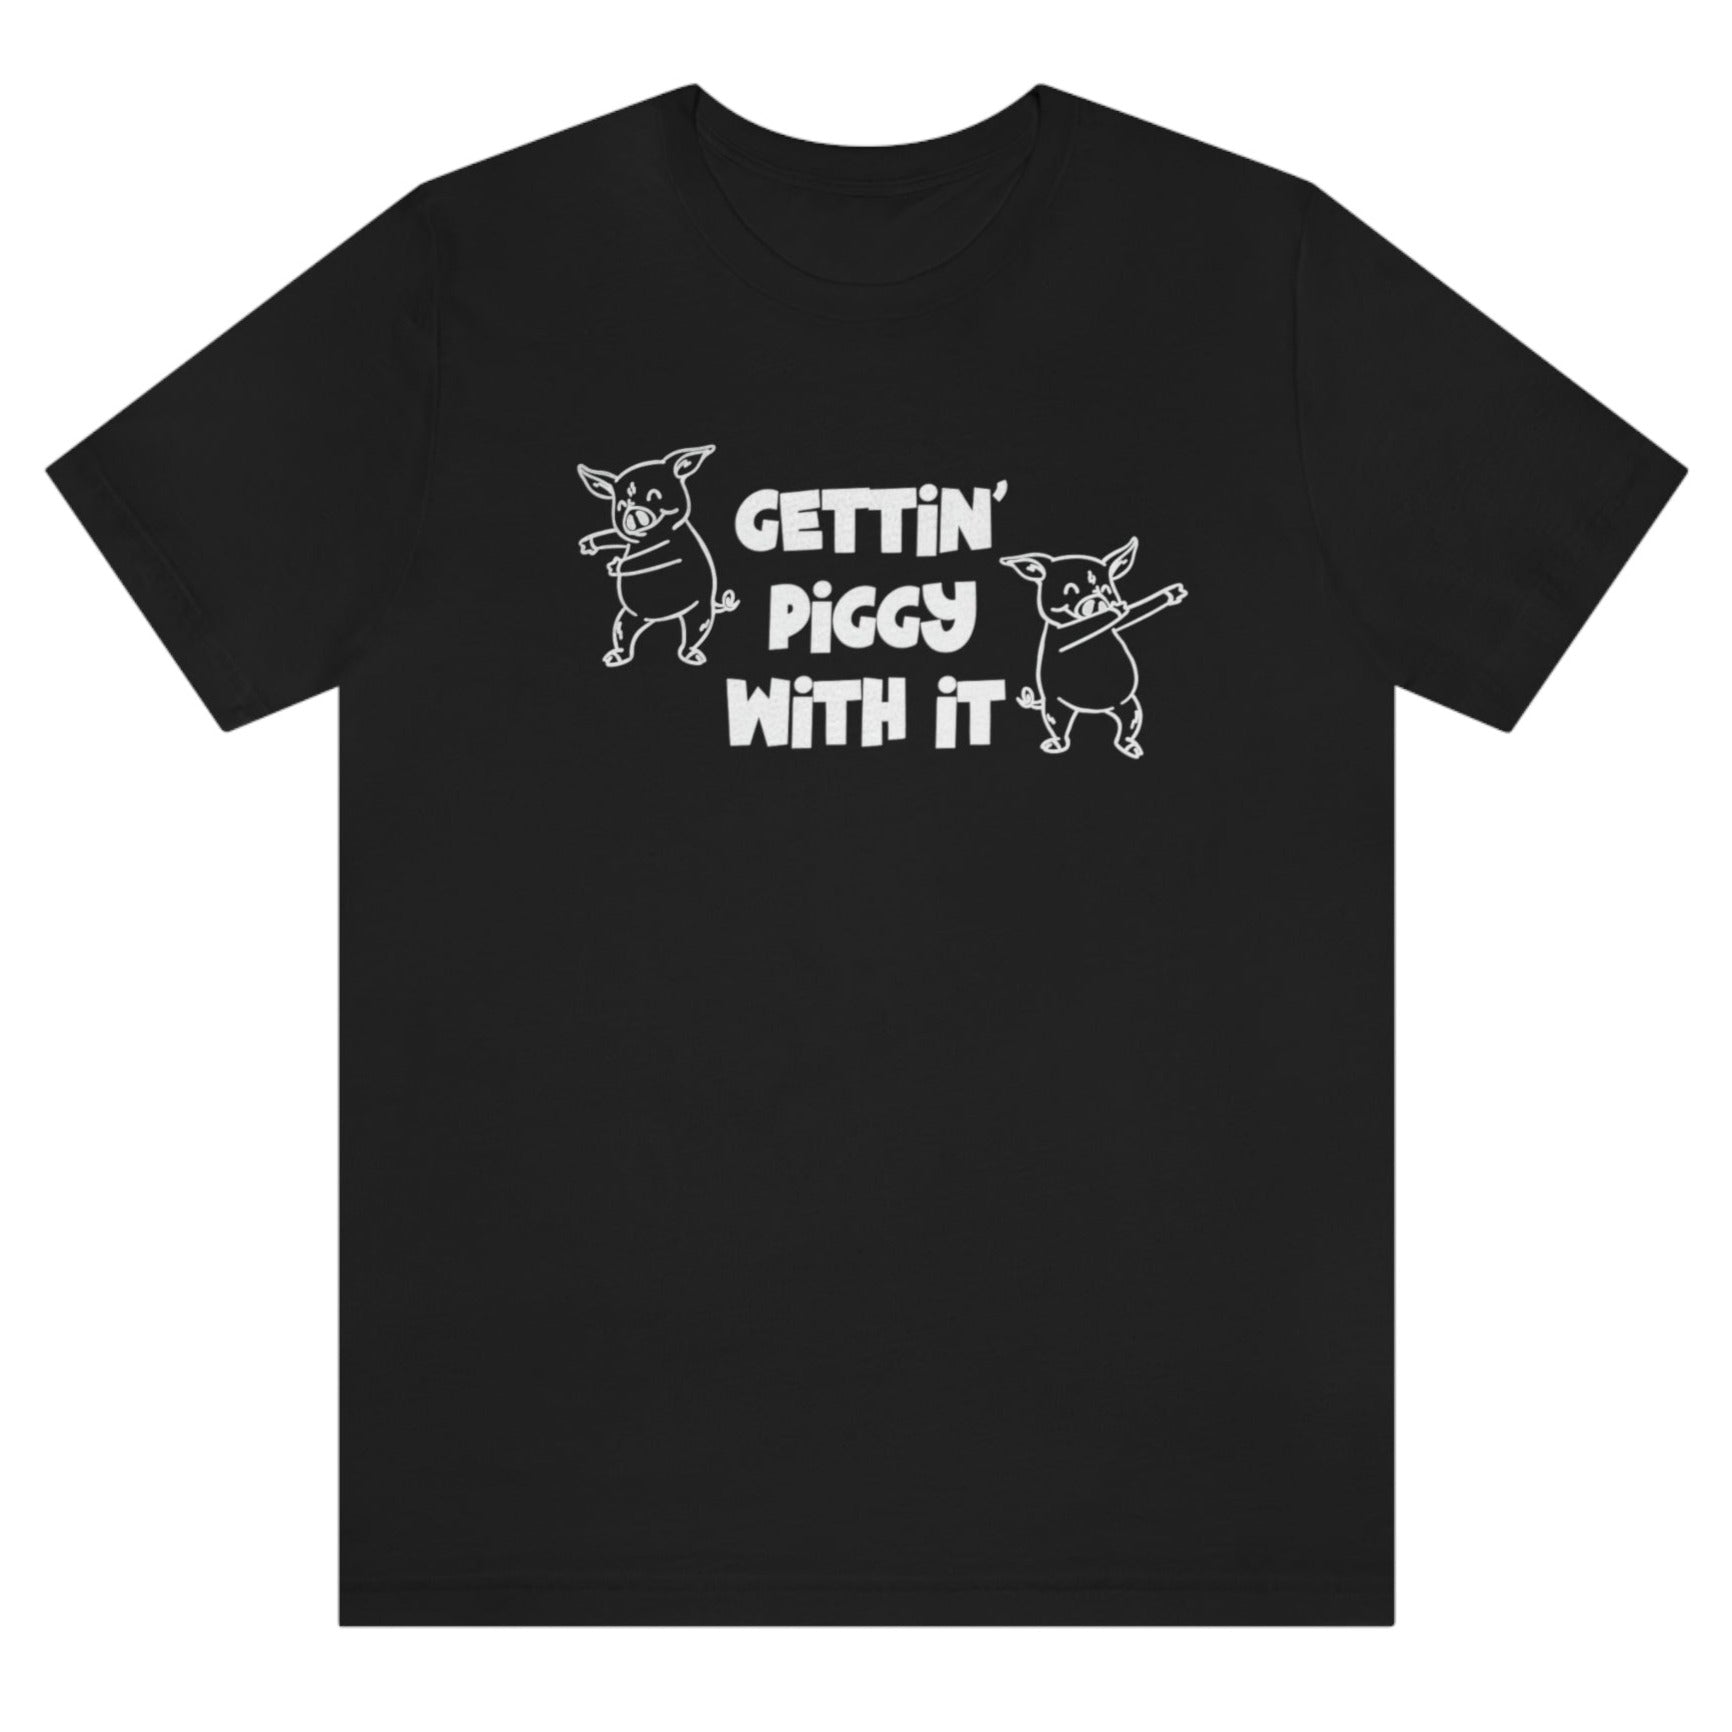 gettin-piggy-with-it-black-t-shirt-funny-dancing-pigs